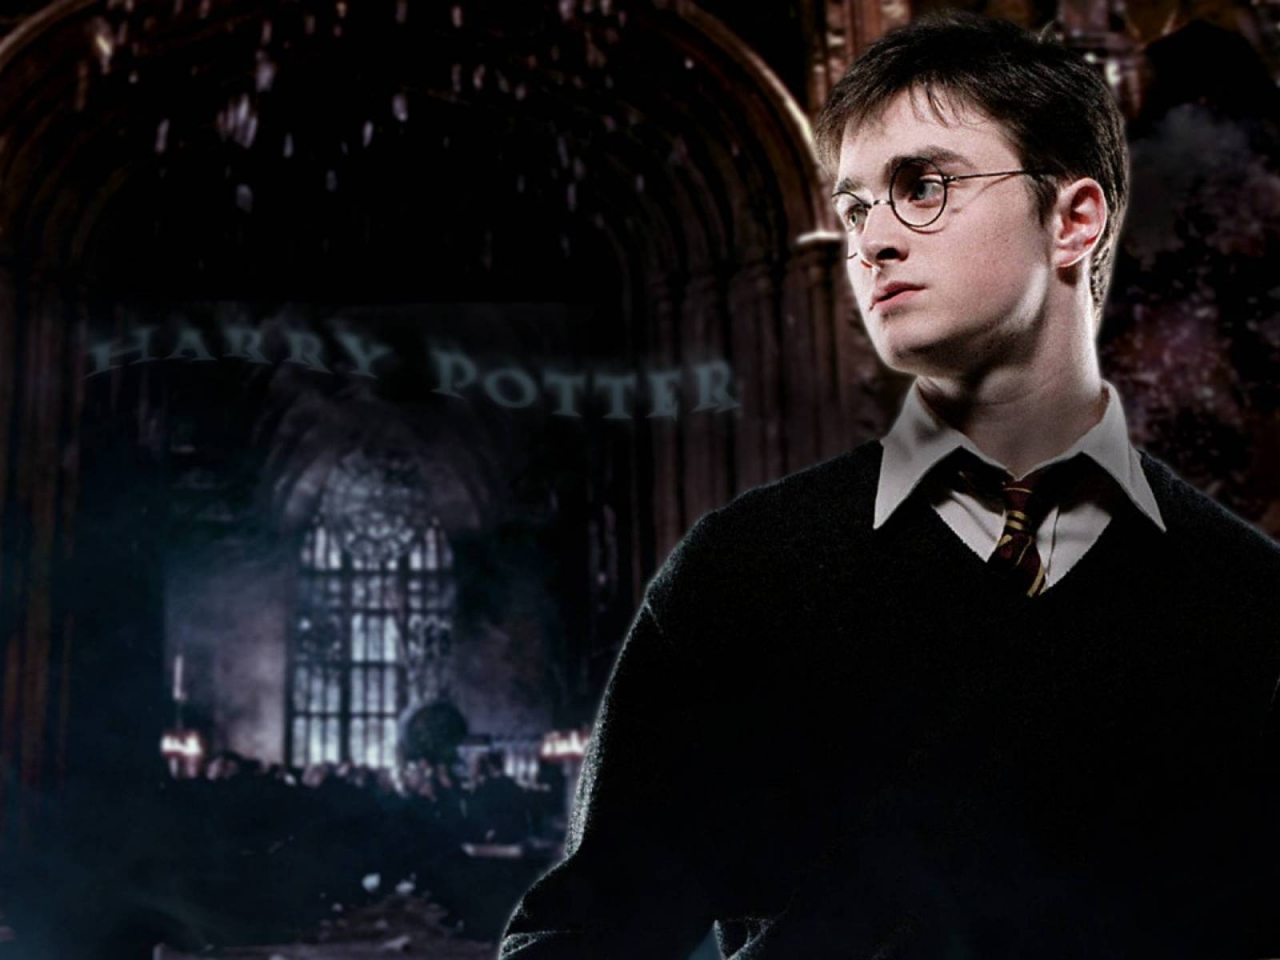 Harry Potter Daniel Radcliffe for 1280 x 960 resolution